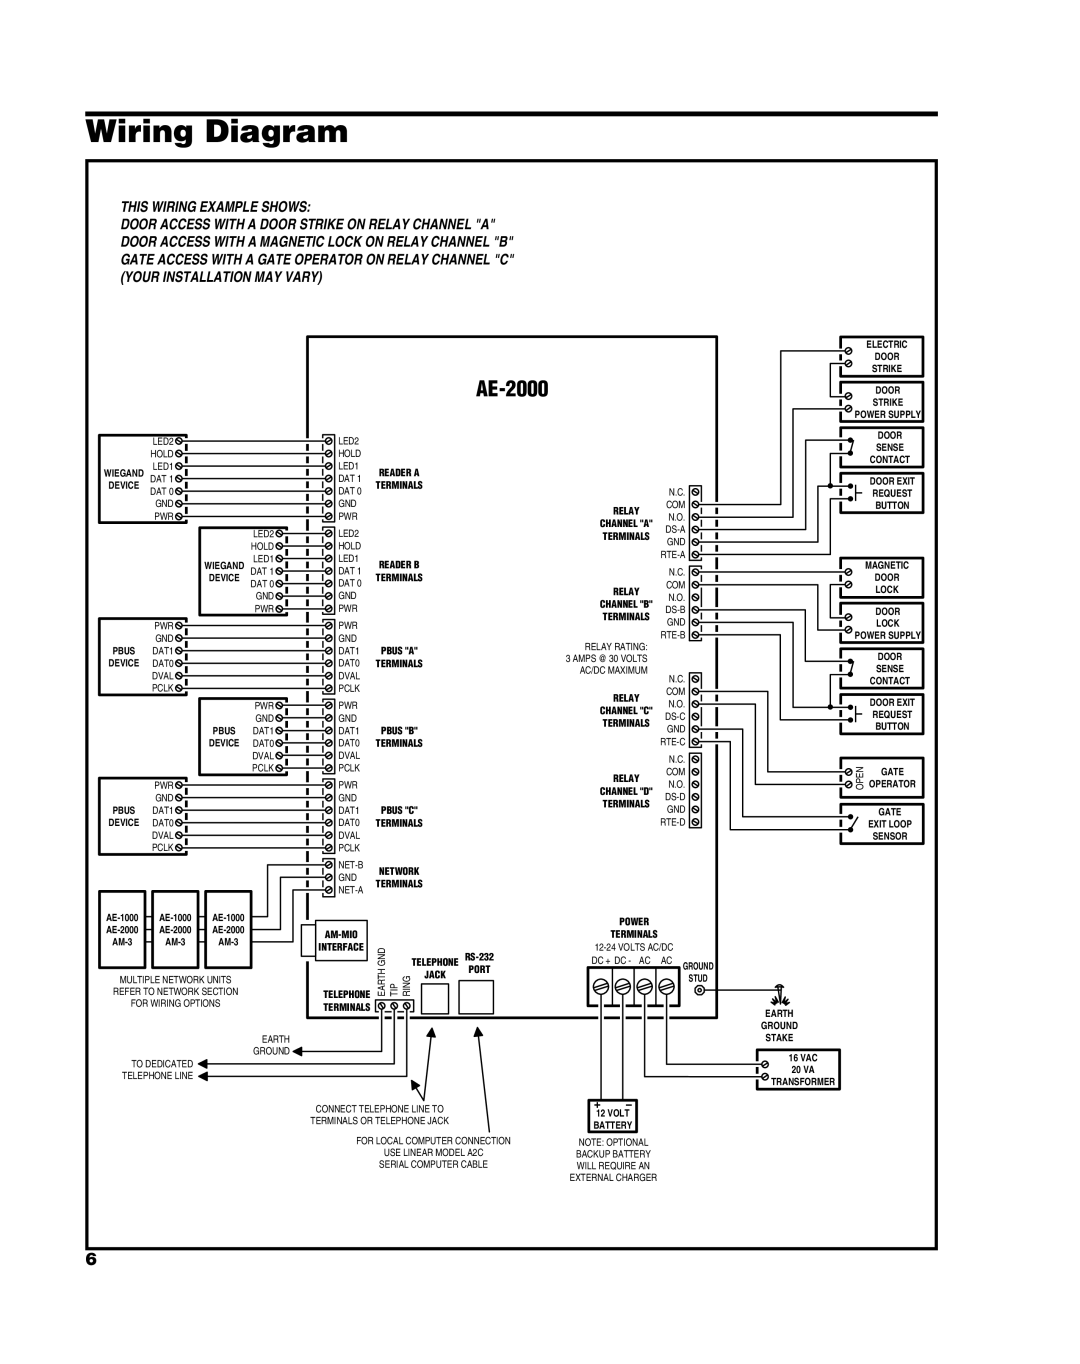 Linear AE-2000 installation instructions Wiring Diagram, This Wiring Example Shows 